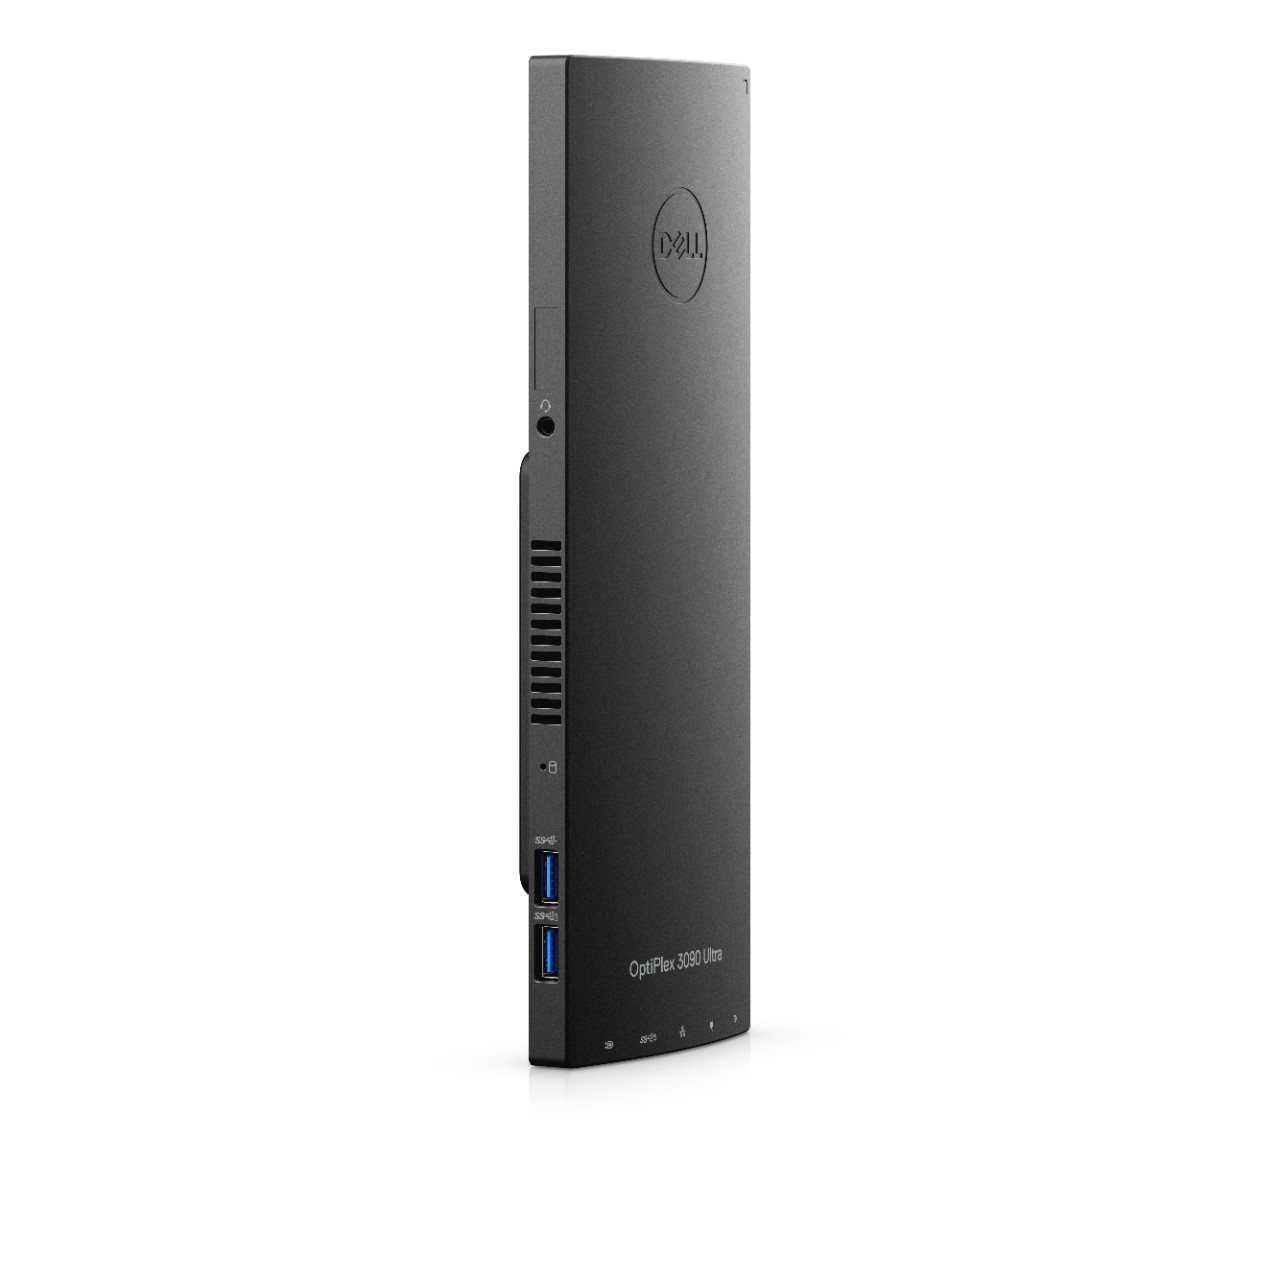 The Dell OptiPlex 3090 Ultra is an all-in-one that hides neatly behind a  monitor while still offering enough modularity and connectivity options -   News